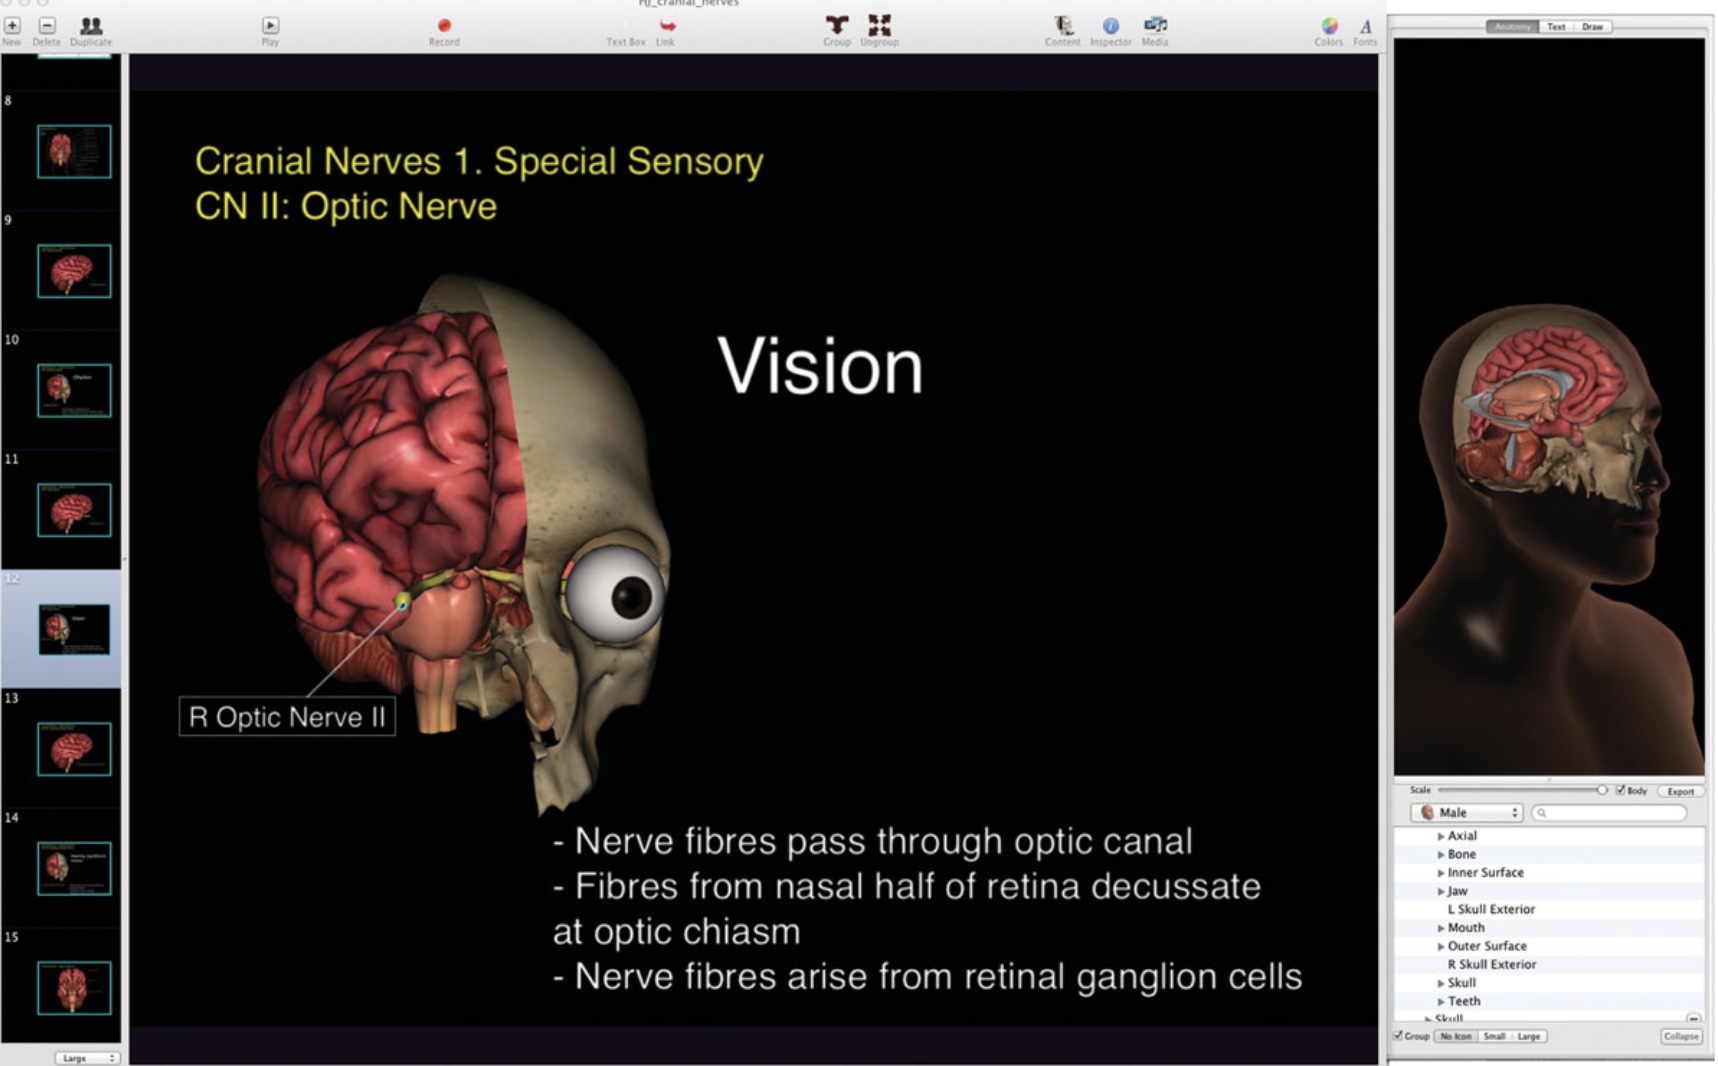 The LINDSAY Virtual Human Project: An immersive approach to anatomy and physiology